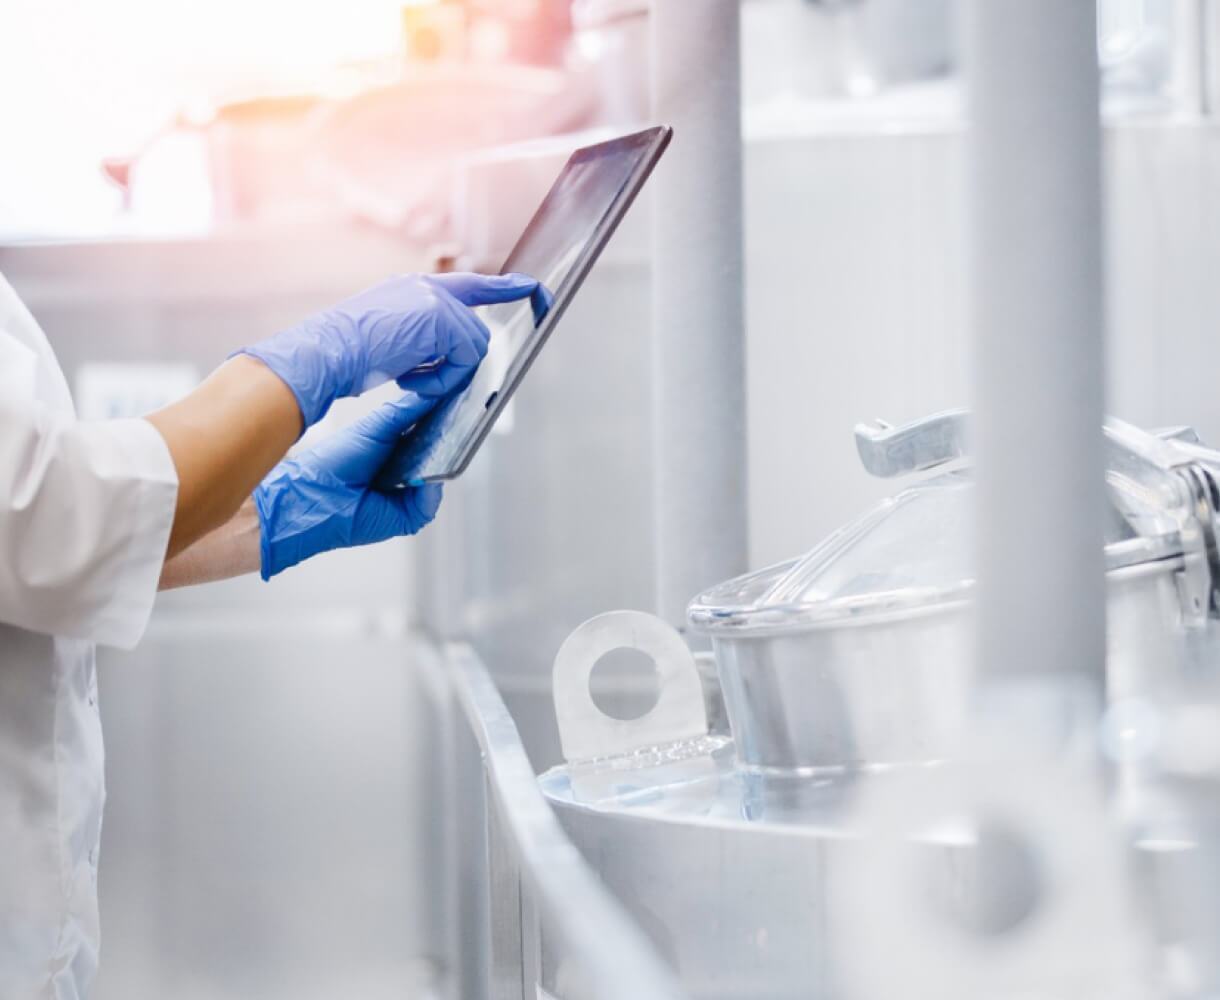 A lab technician in protective gear uses a tablet to monitor processes in a industrial manufacturing environment.